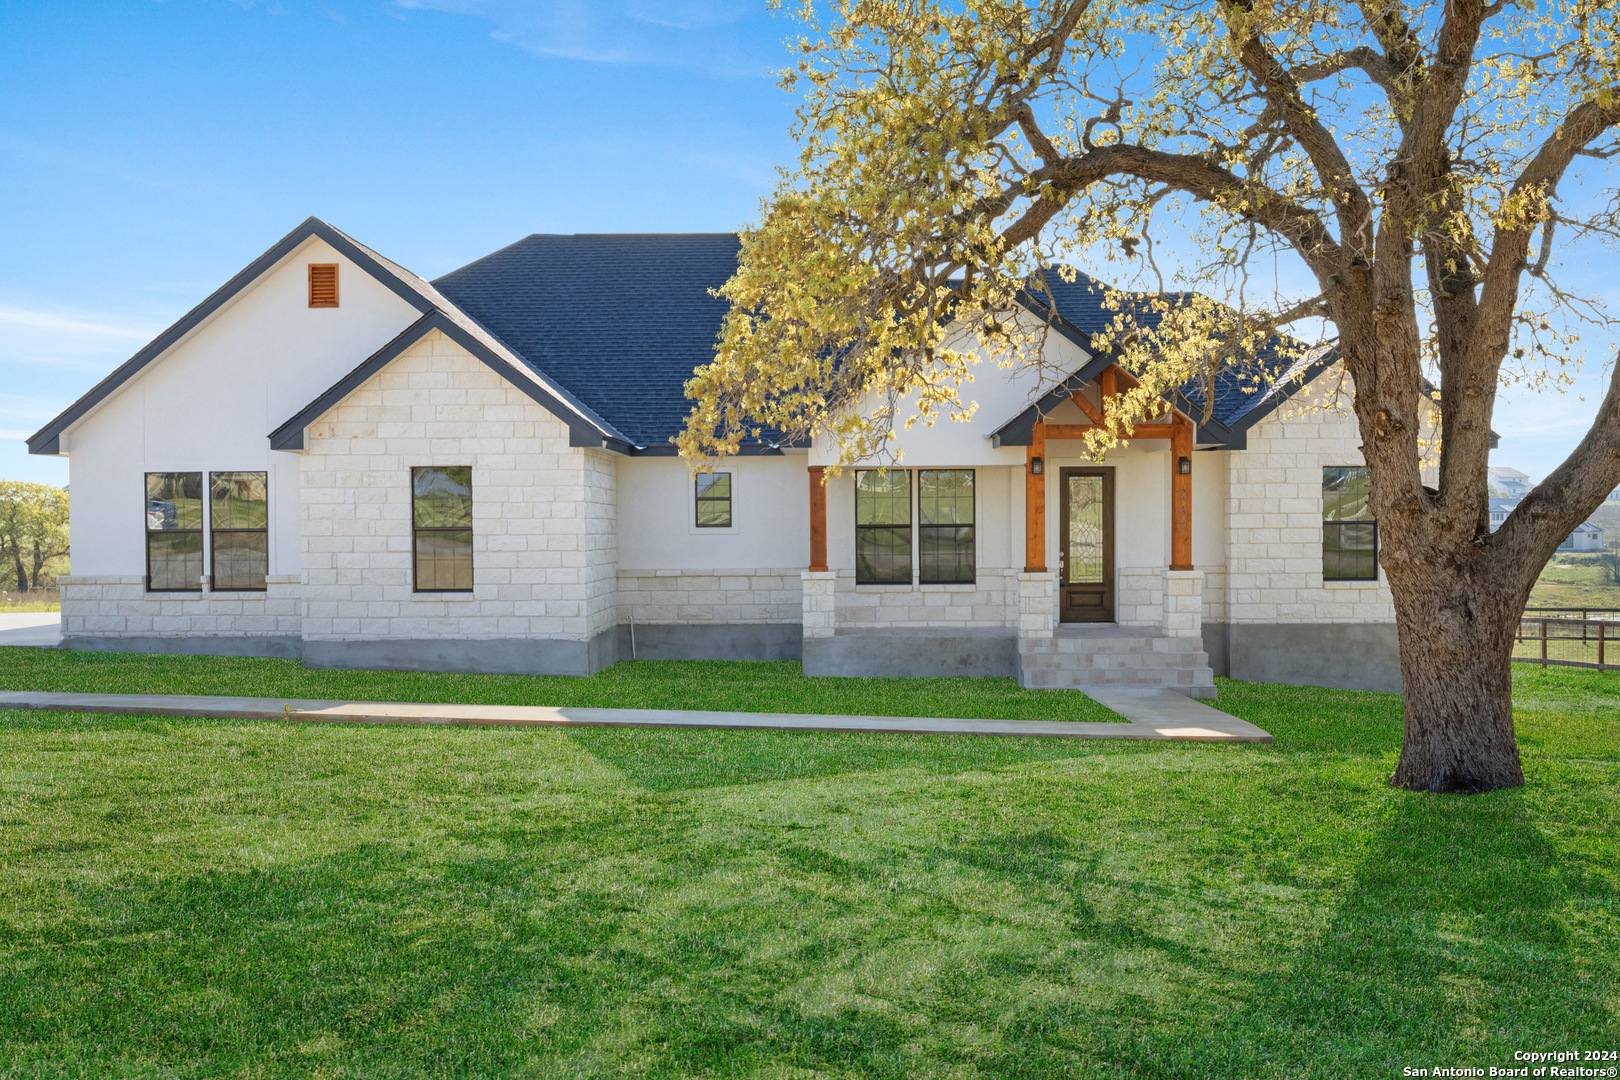 Photo of 237 Lakeview Cir in La Vernia, TX